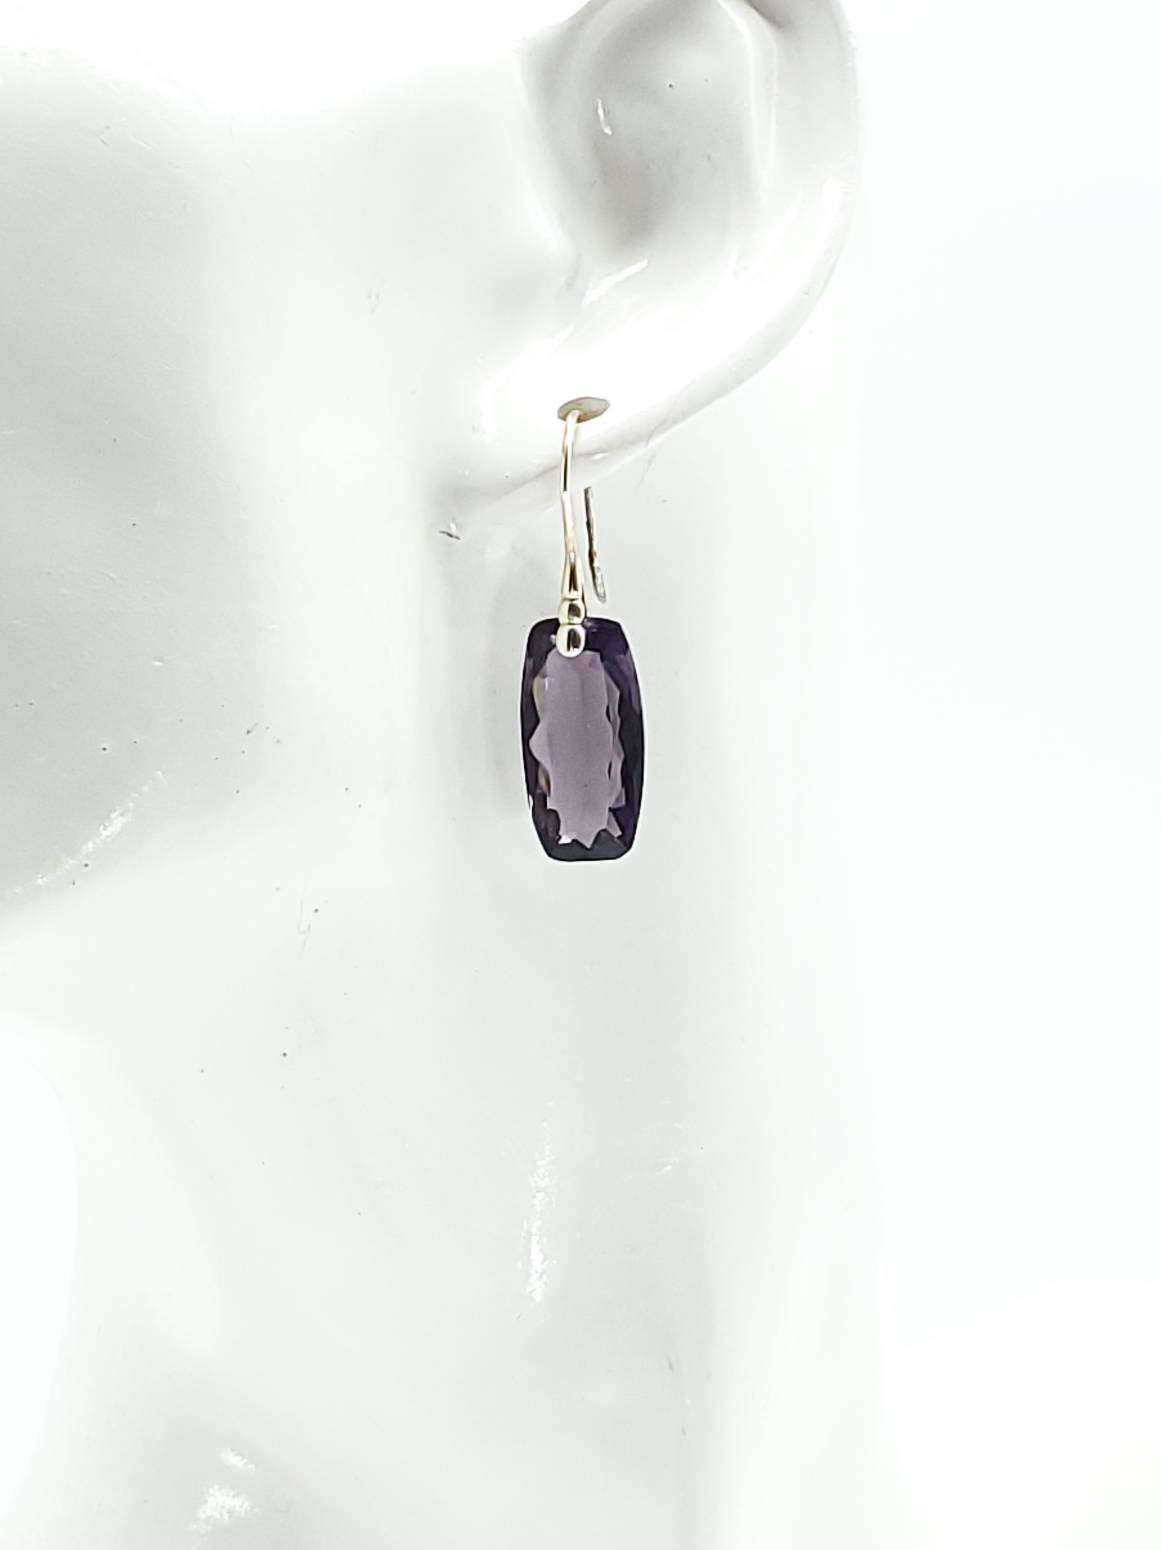 Cushion Cut Hydro Amethyst Earrings on Sterling Silver Ear Wires - The Caffeinated Raven